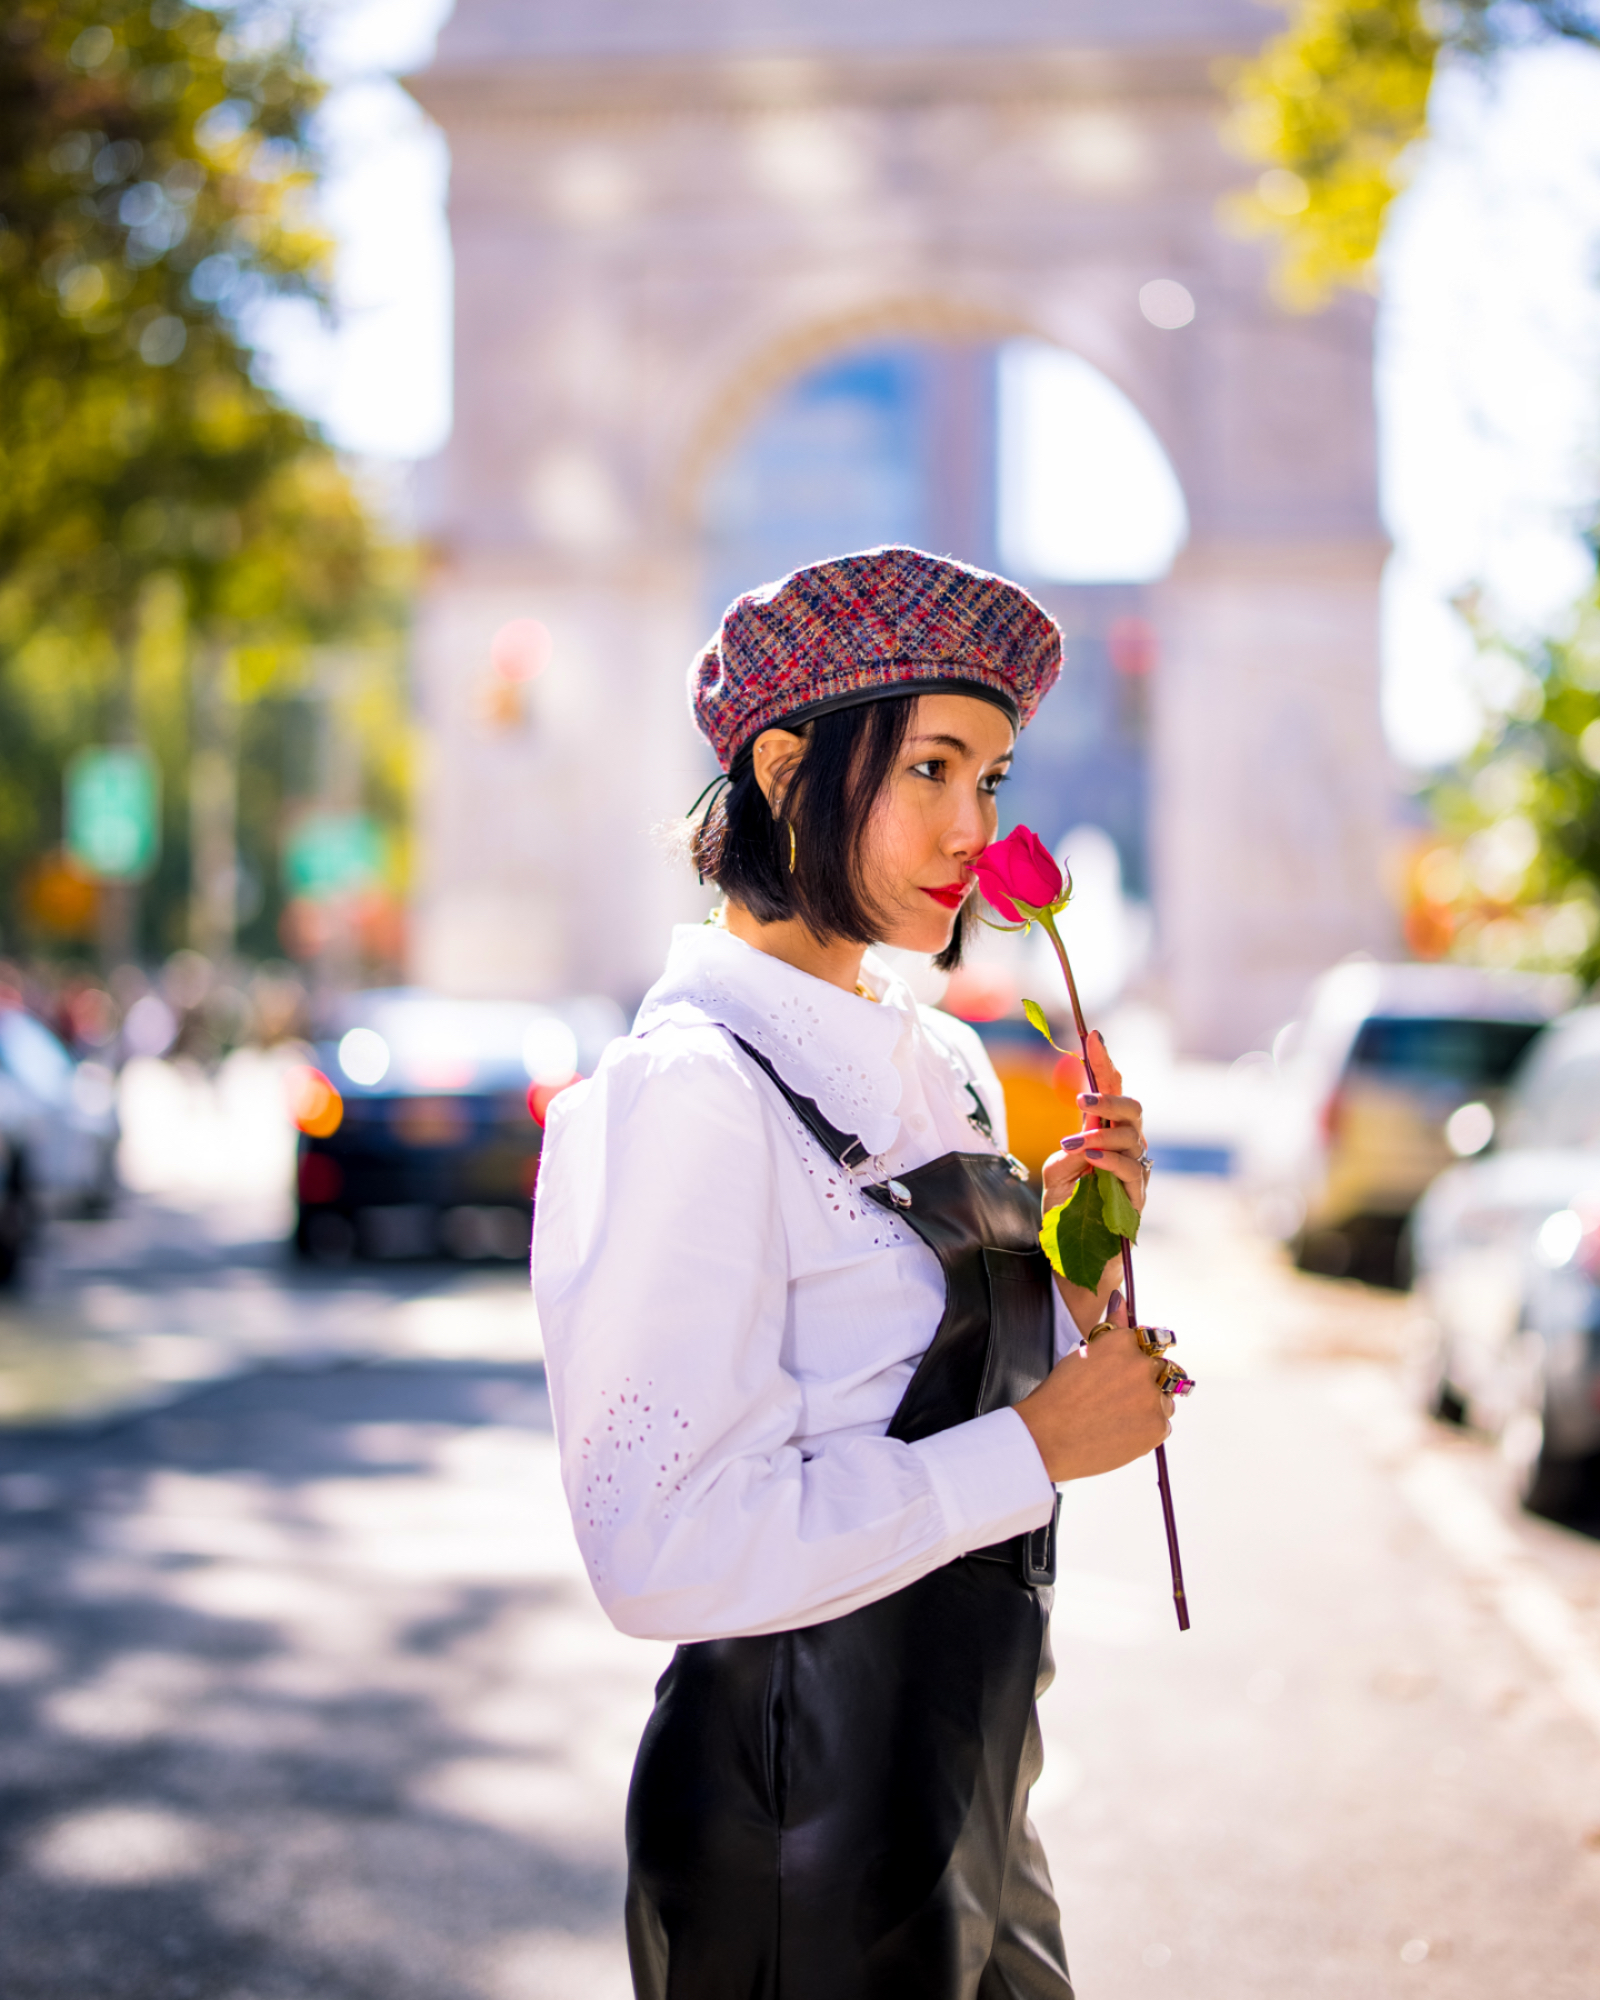 nanphanita is channeling parisienne chic at washington square park new york city in san diego hat company hat beret